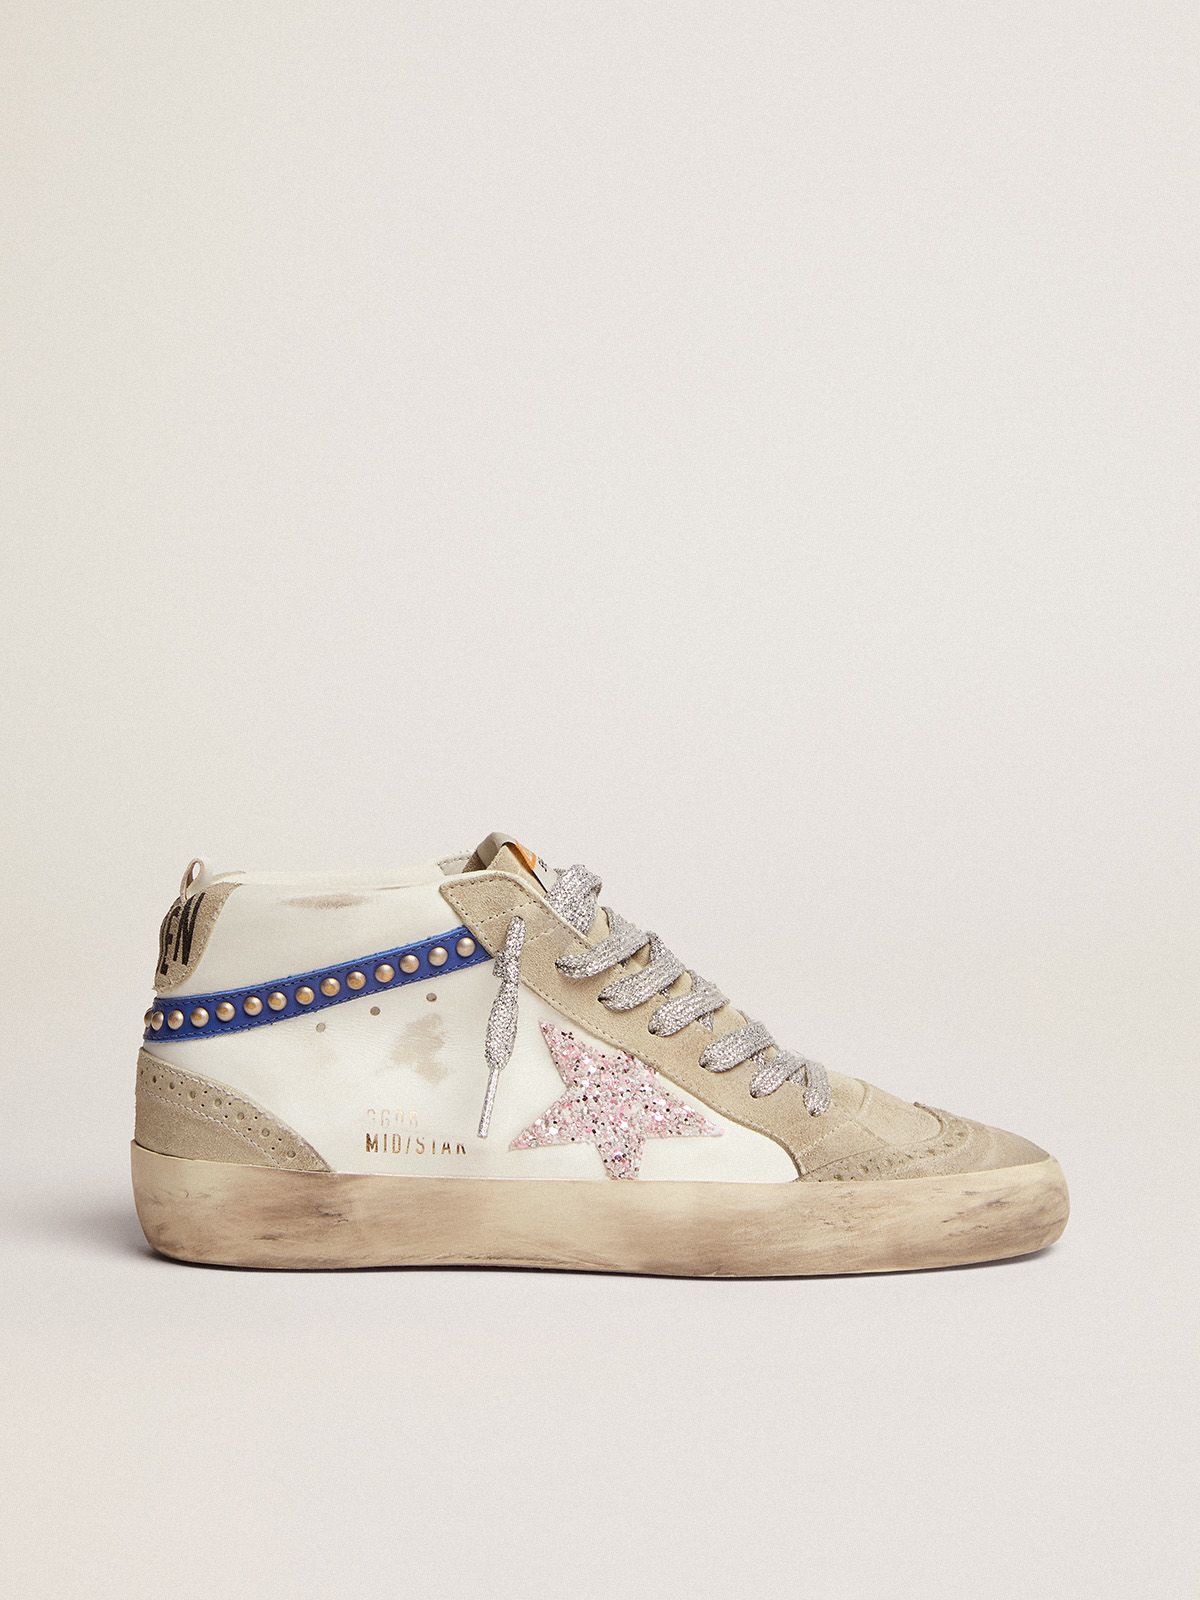 golden goose white sneakers star Star blue gold-colored studs Mid flash with pink leather glitter LTD and